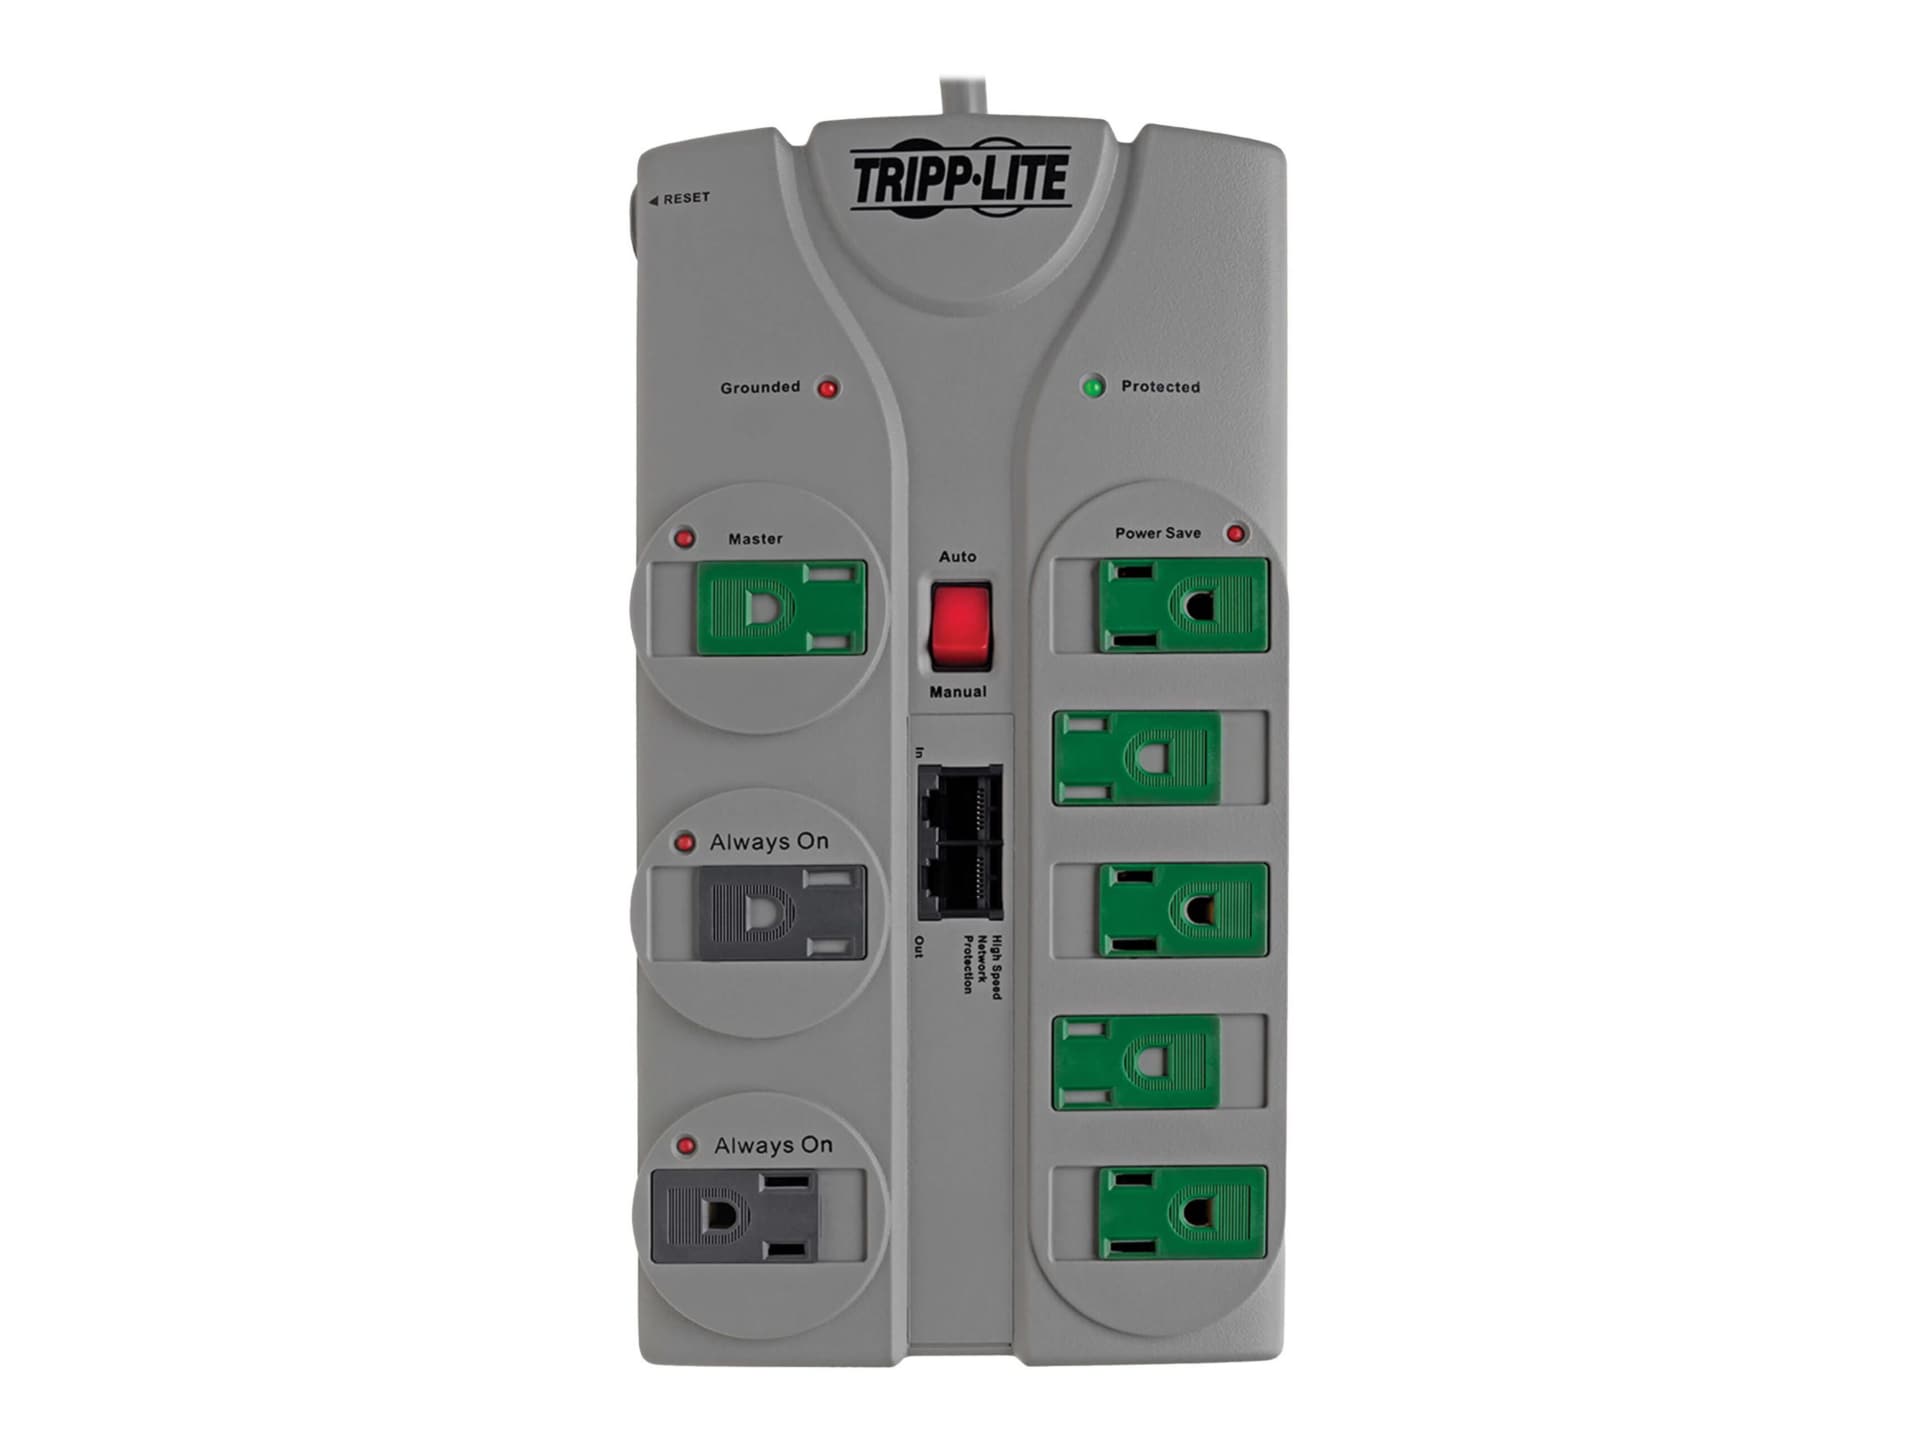 Tripp Lite Eco Surge Protector Green 120V 8 Outlet RJ45 8' Cord 2160 Joule - surge protector